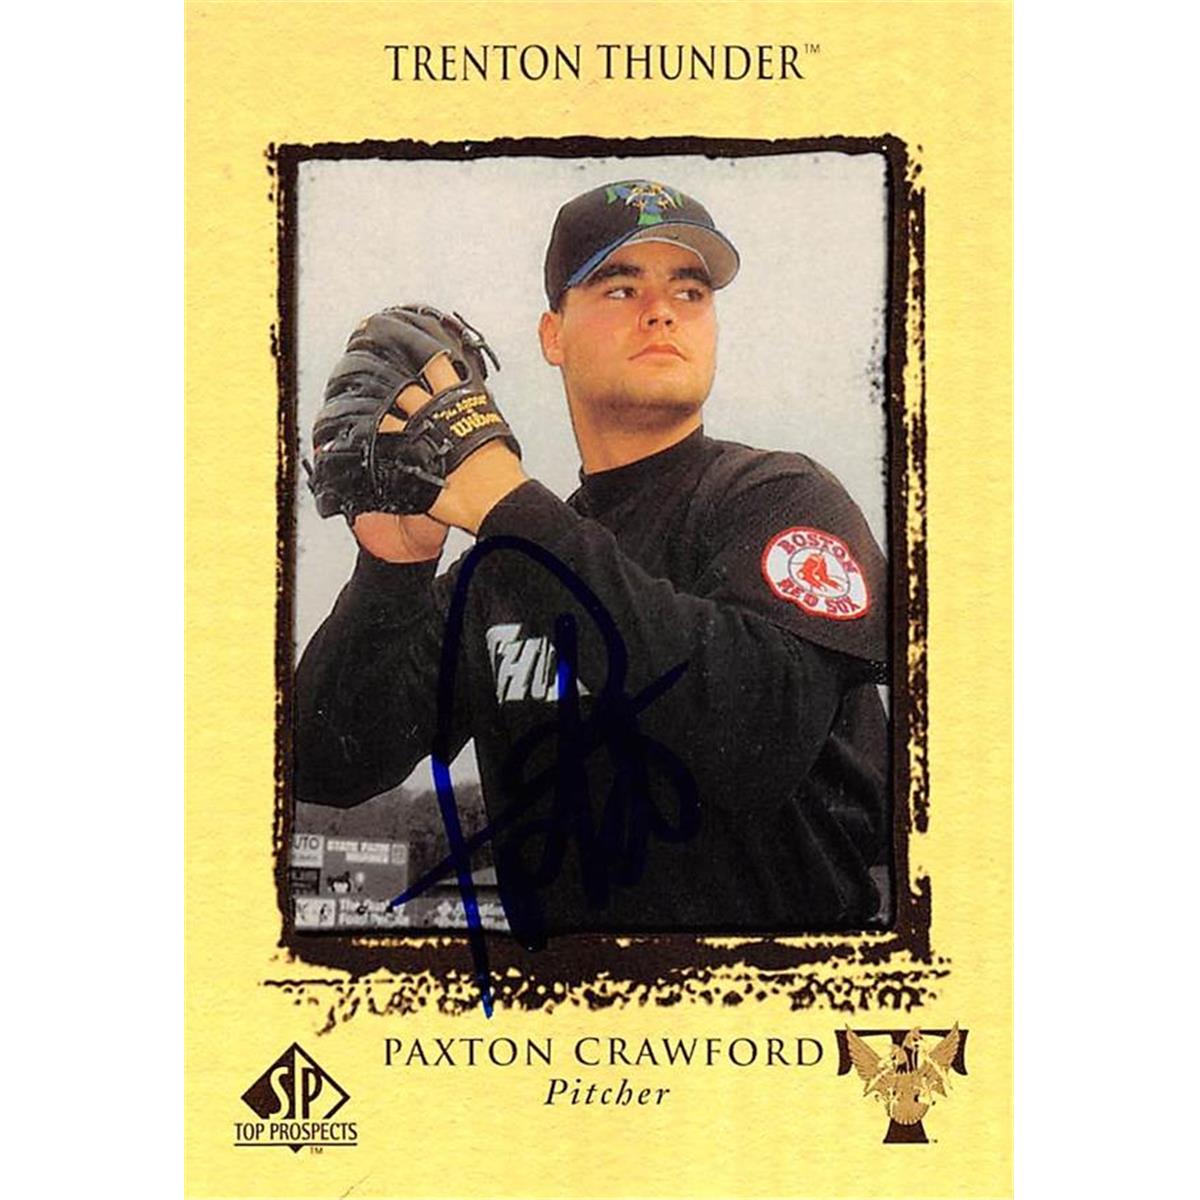 465788 Paxton Crawford Autographed Trenton Thunder Baseball Card 1999 Upper Deck Top Prospects Rookie No. 32 -  Autograph Warehouse